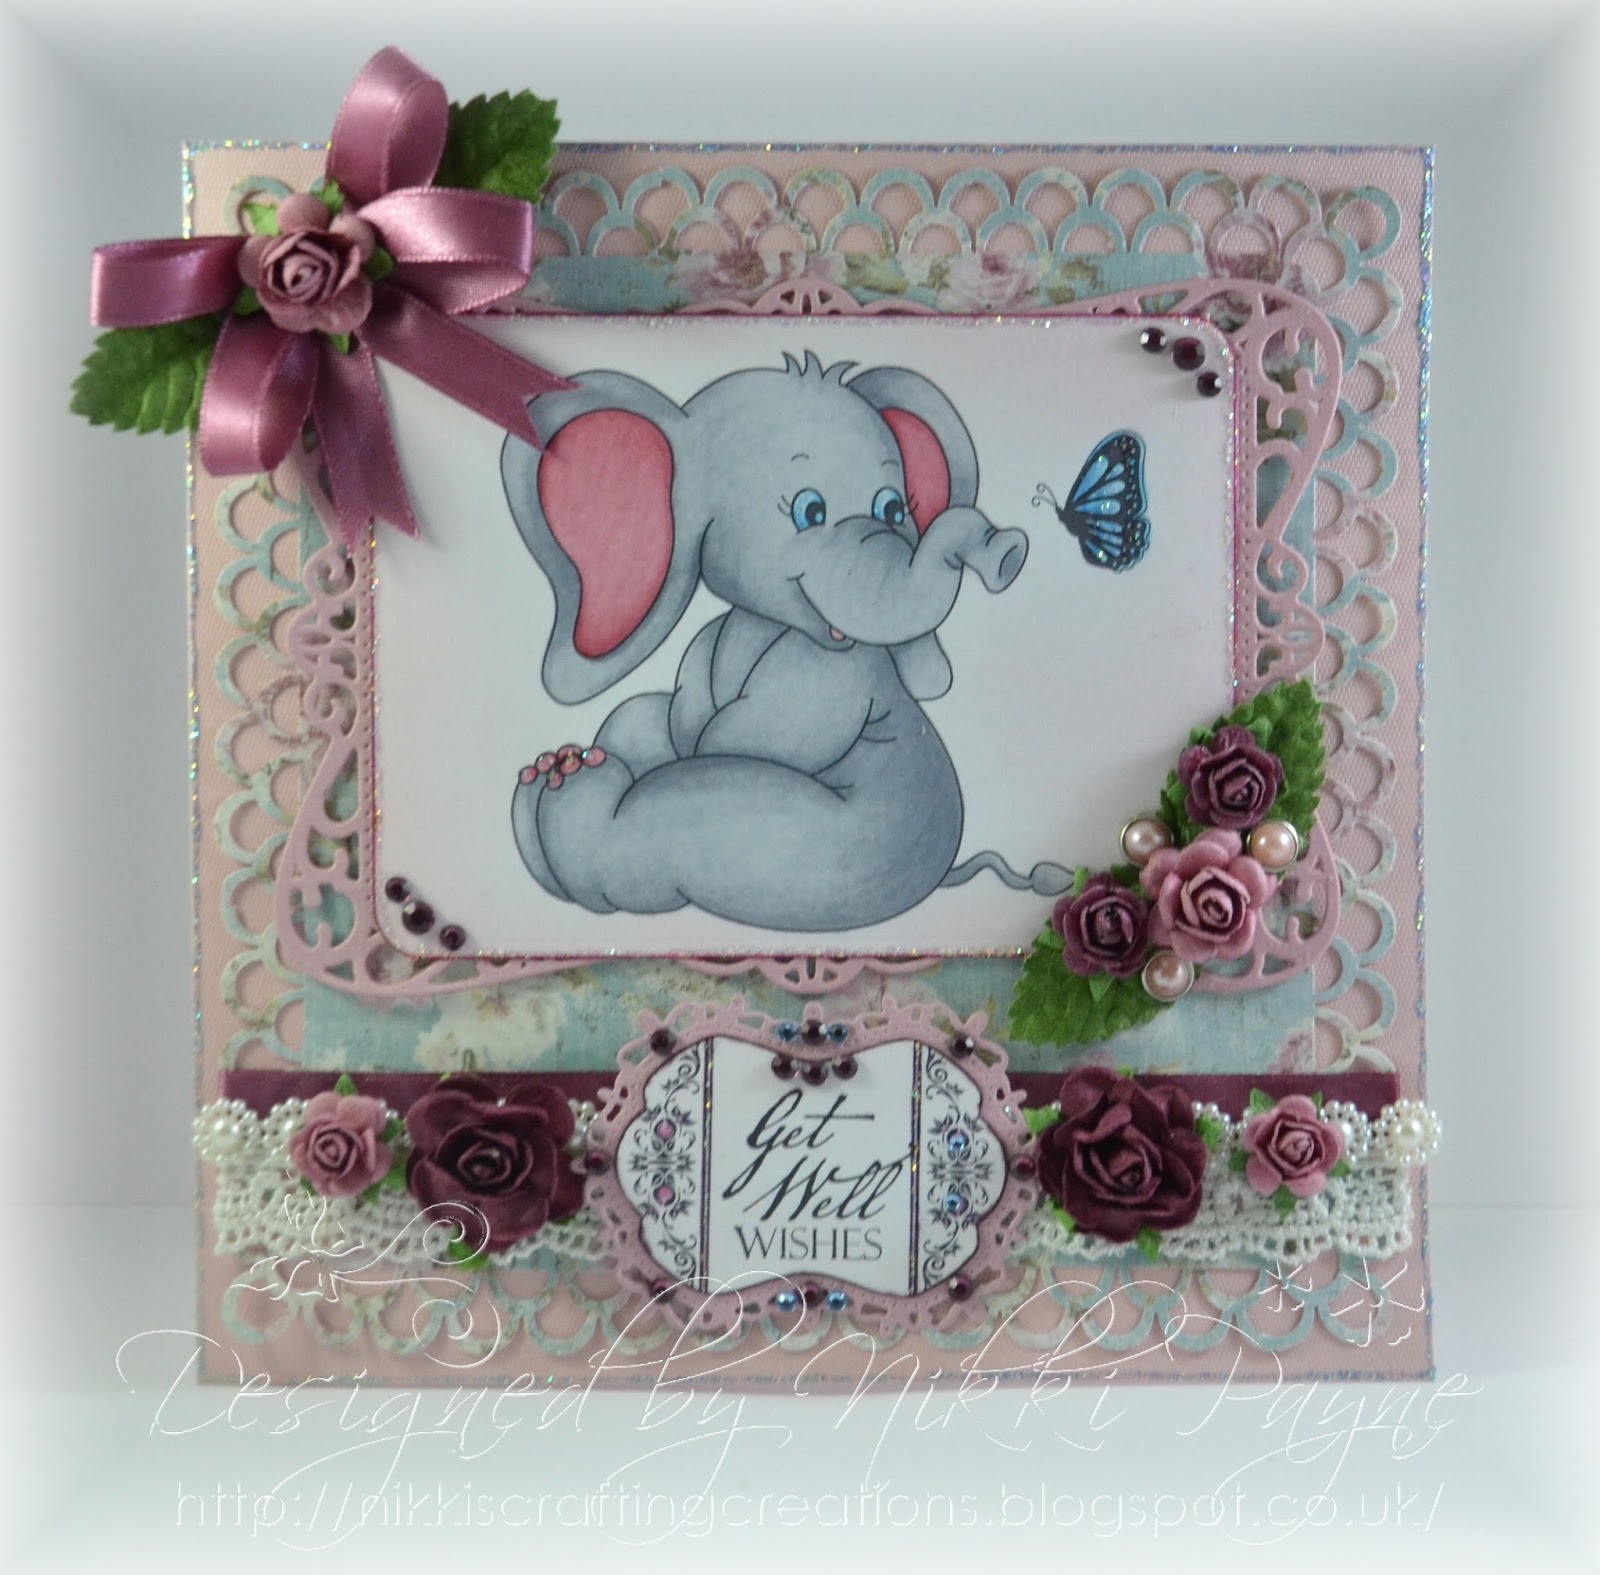 Nikki's Crafting Creations: Elphie Elephant - Get Well Card and Gift Box